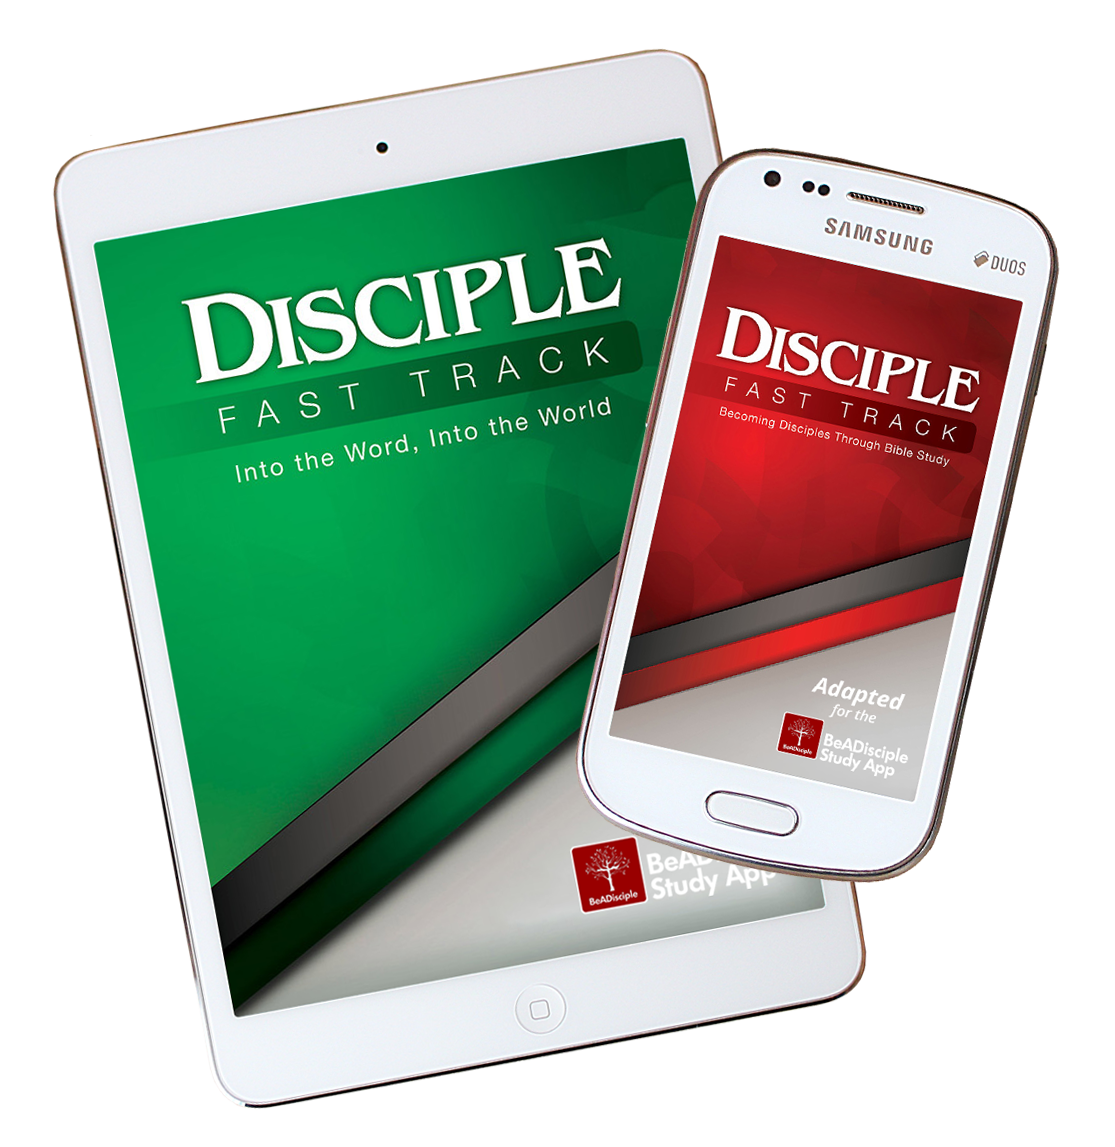 Disciple-Fast-Track-on-devices.png